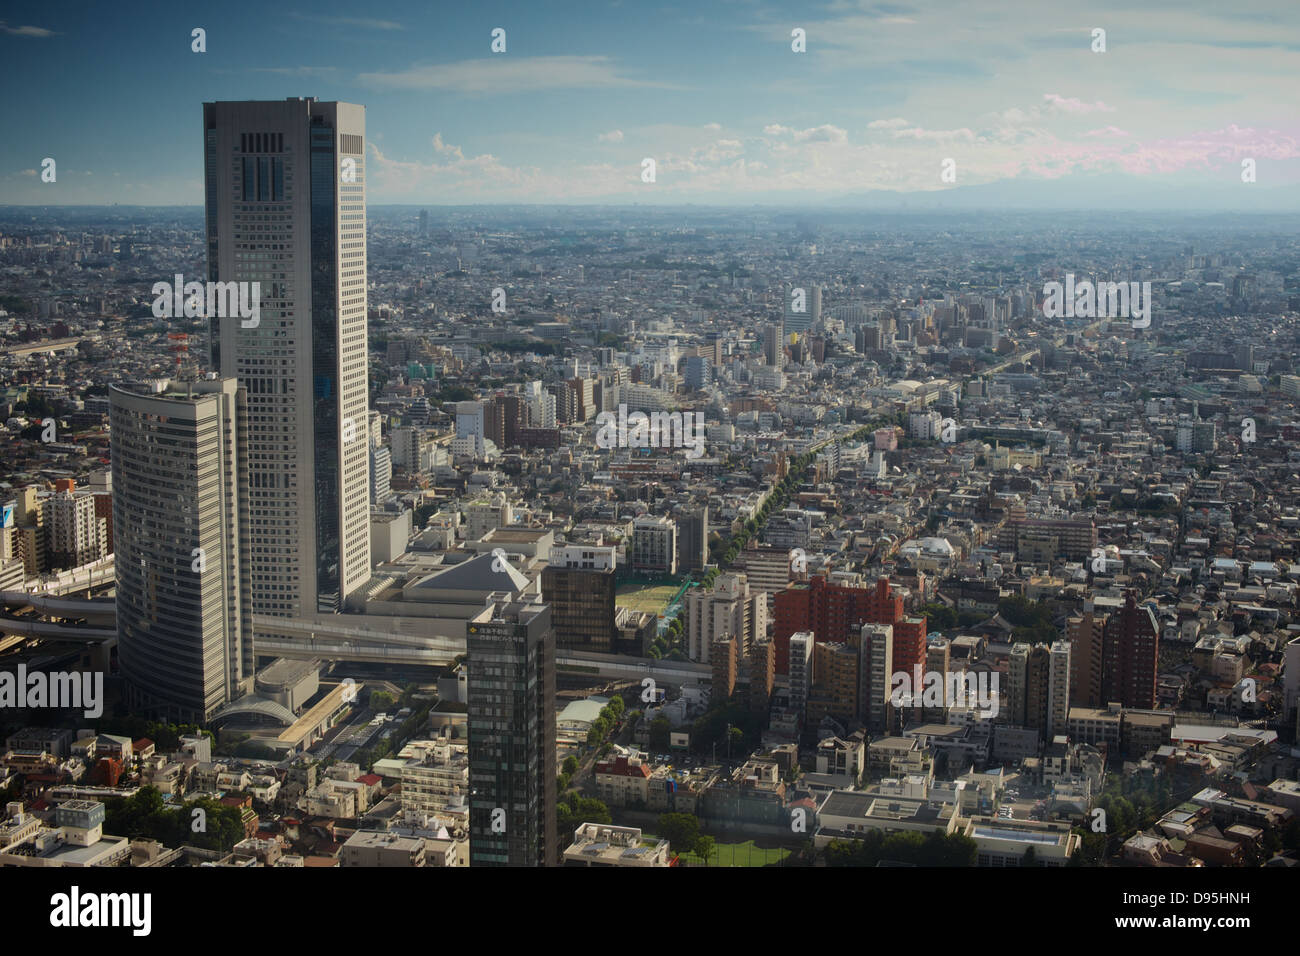 Tokyo skyline as seen from the observatory at the Tokyo Metropolitan Government Building Stock Photo